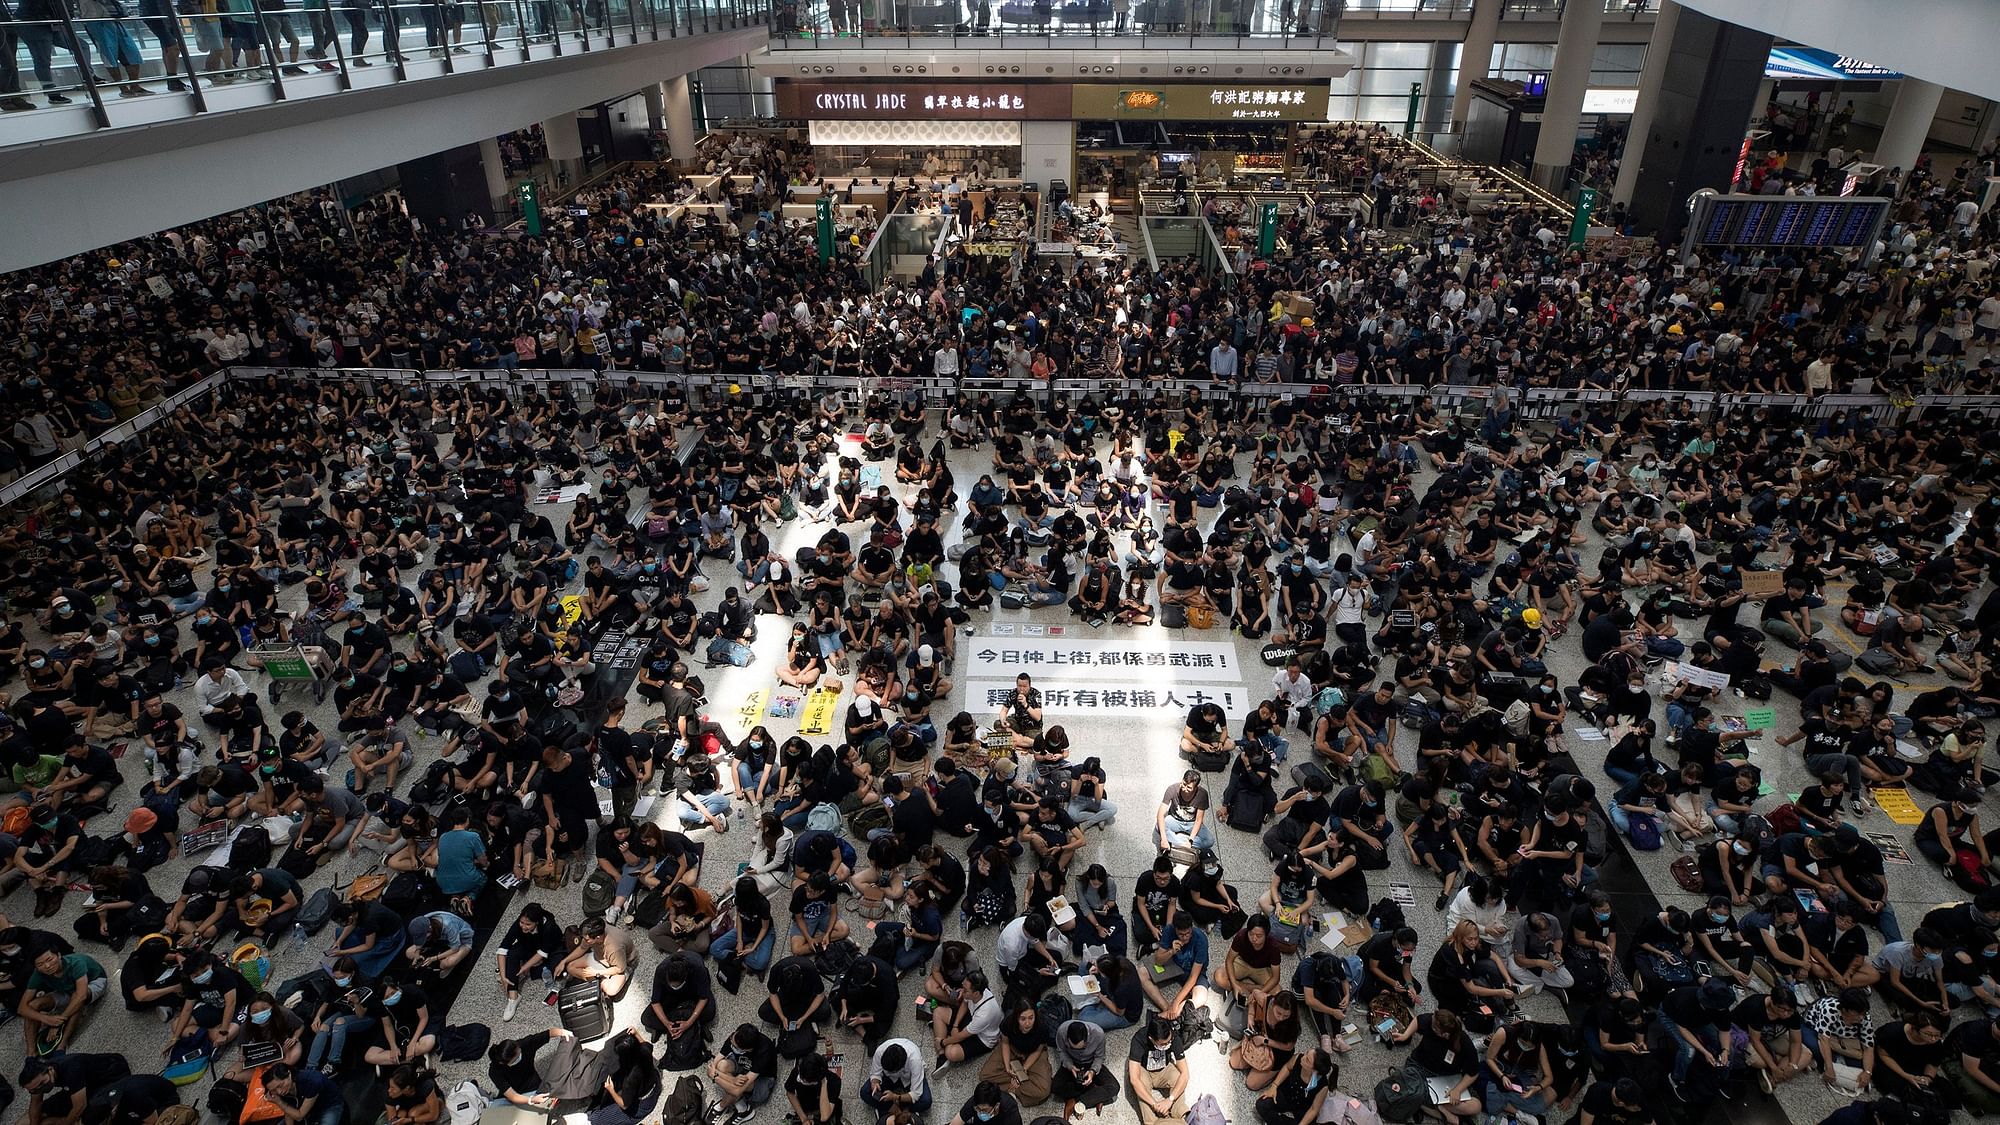 Protesters surround banners that read: “Those on the street today are all warriors!” center top, and “Release all the detainees!” during a sit-in rally at the arrival hall of the Hong Kong International airport.